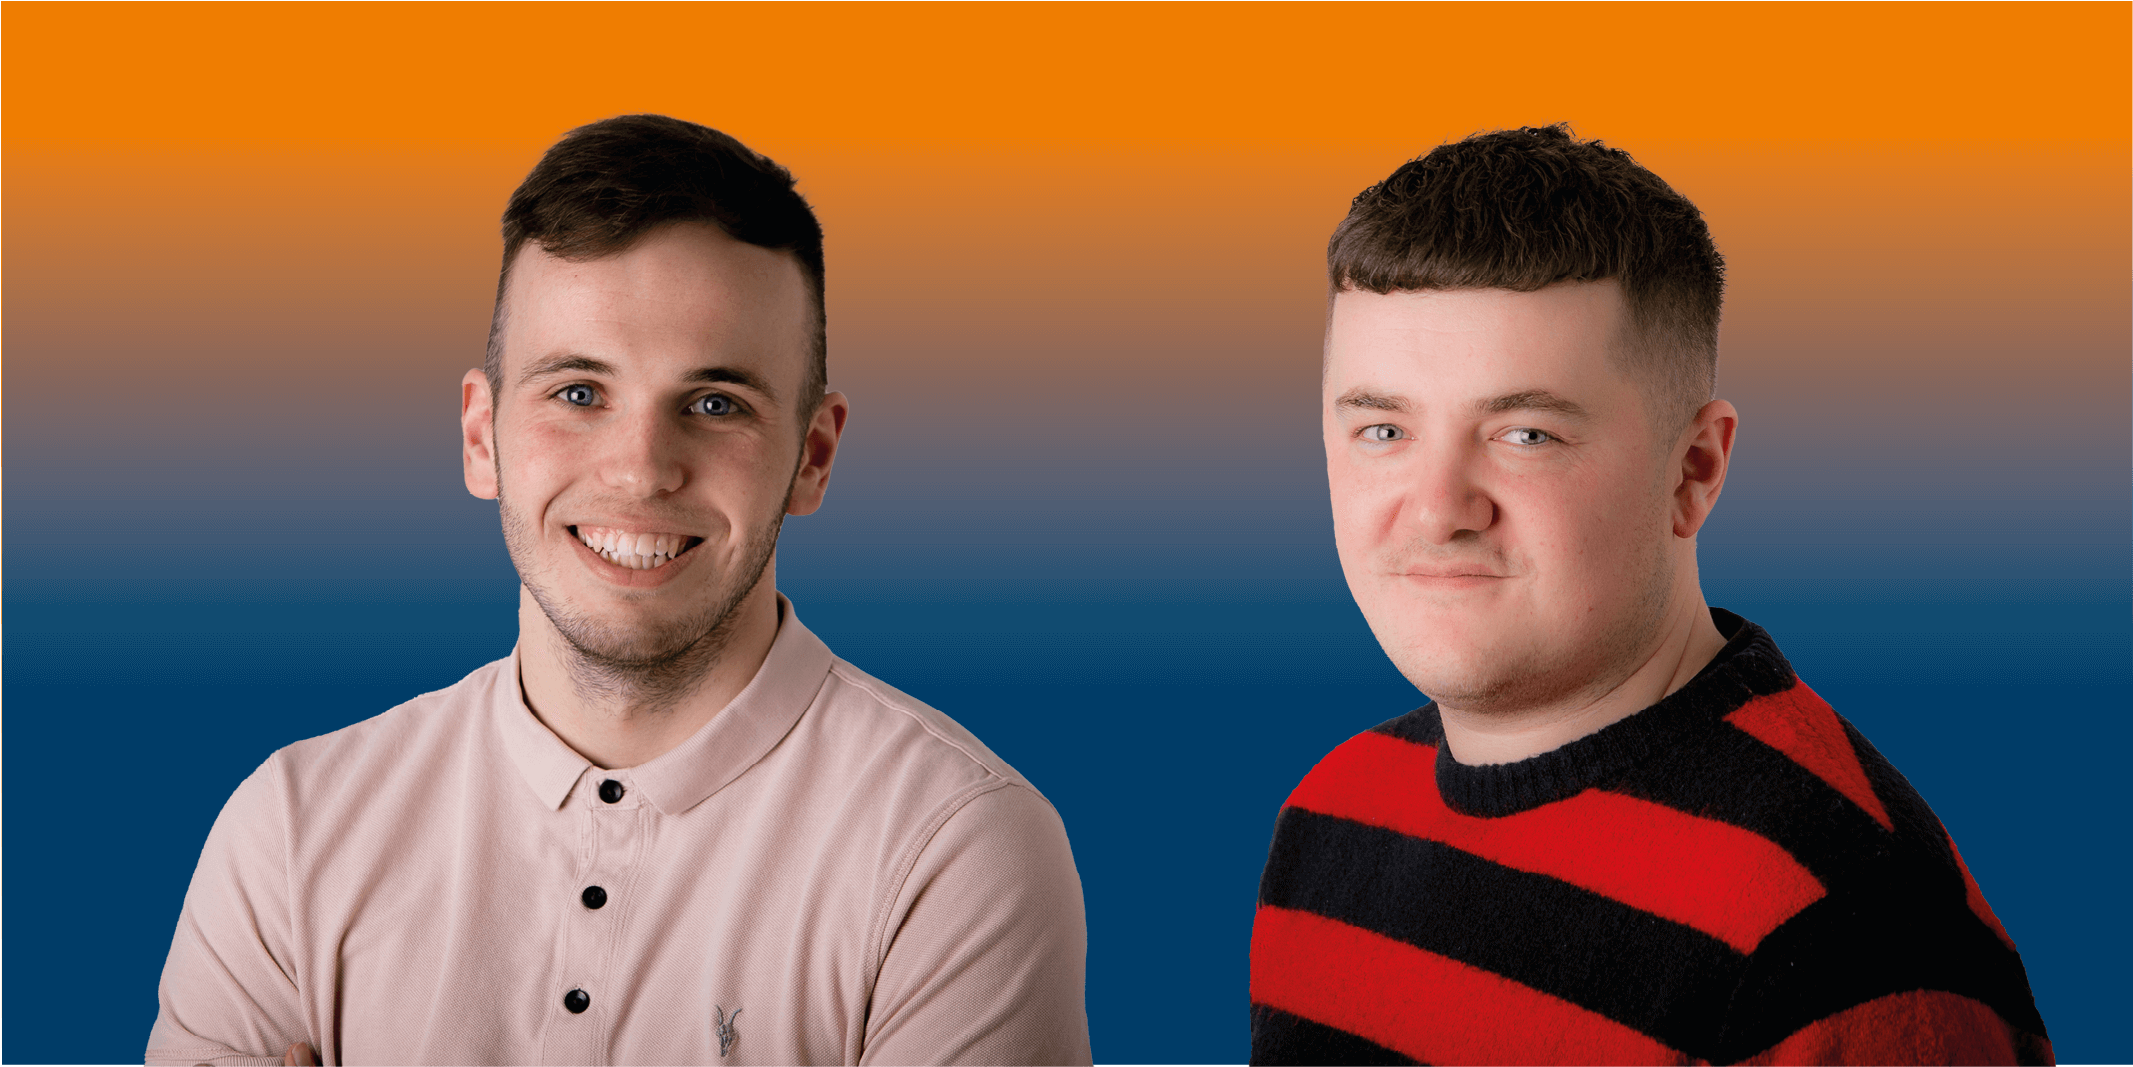 Headshots of Jack and Lewis on a gradient Blue & Orange background